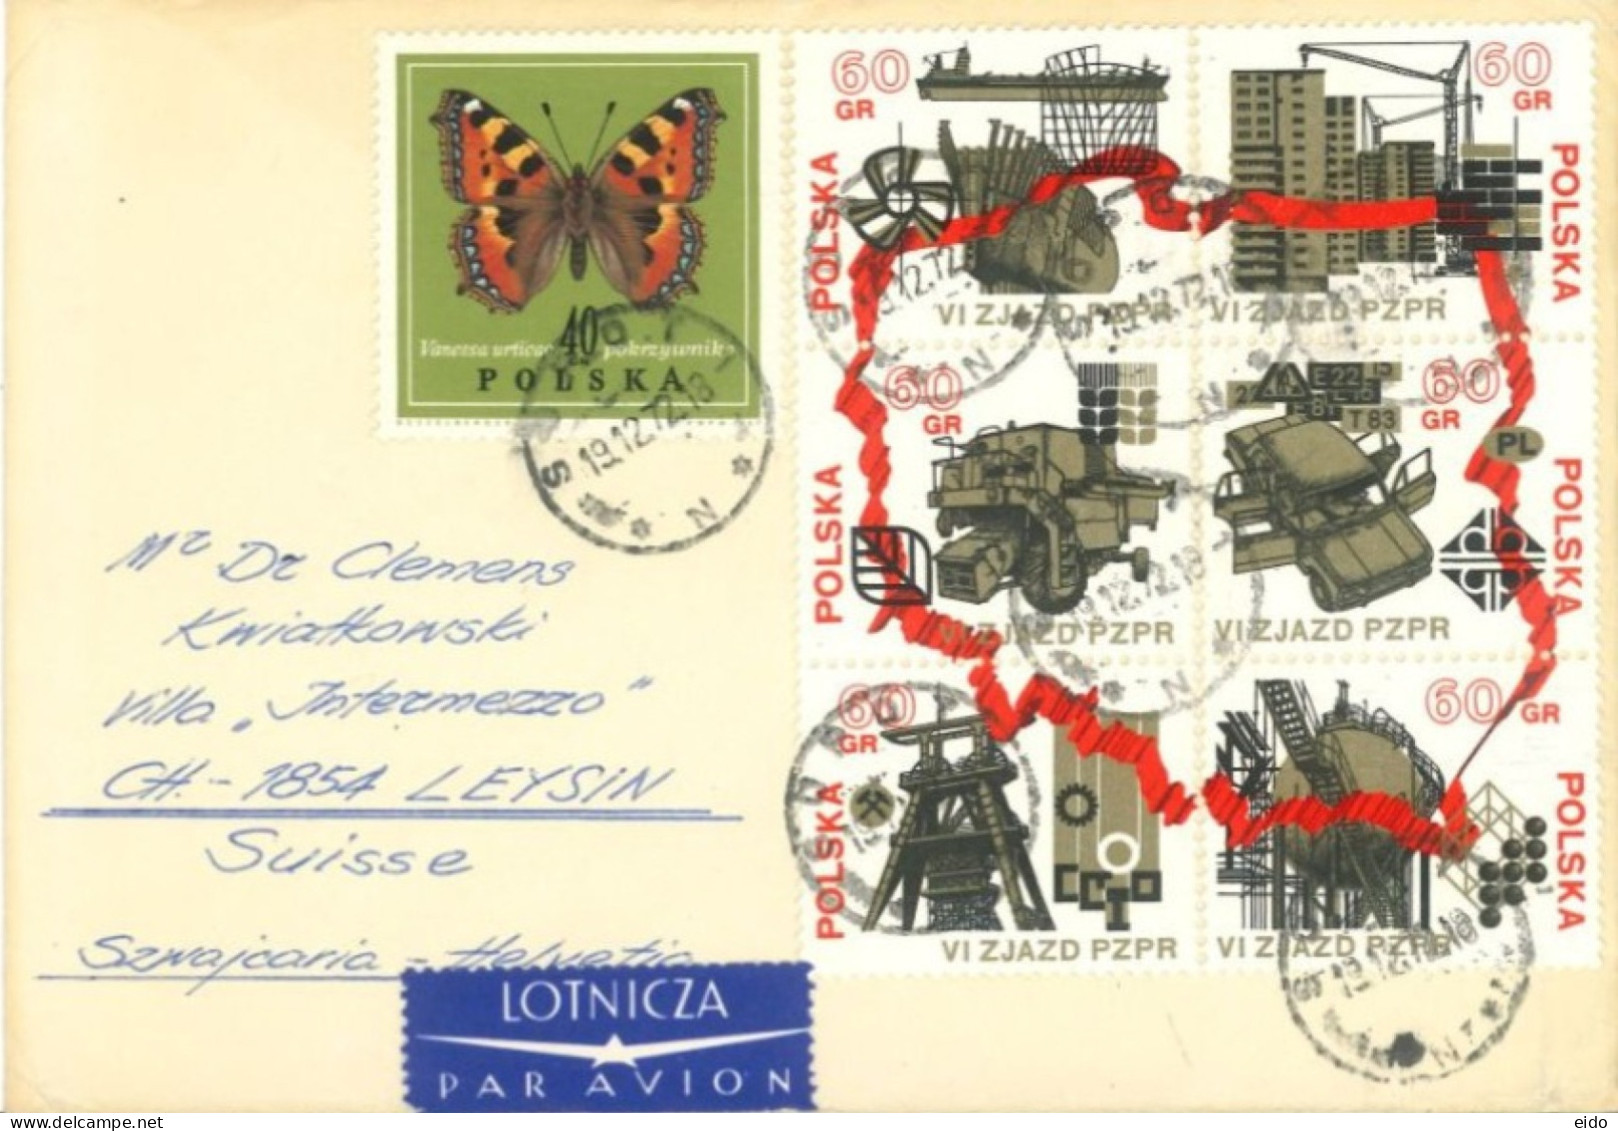 POLAND - 1972, STAMPS COVER TO SWITZERLAND. - Covers & Documents